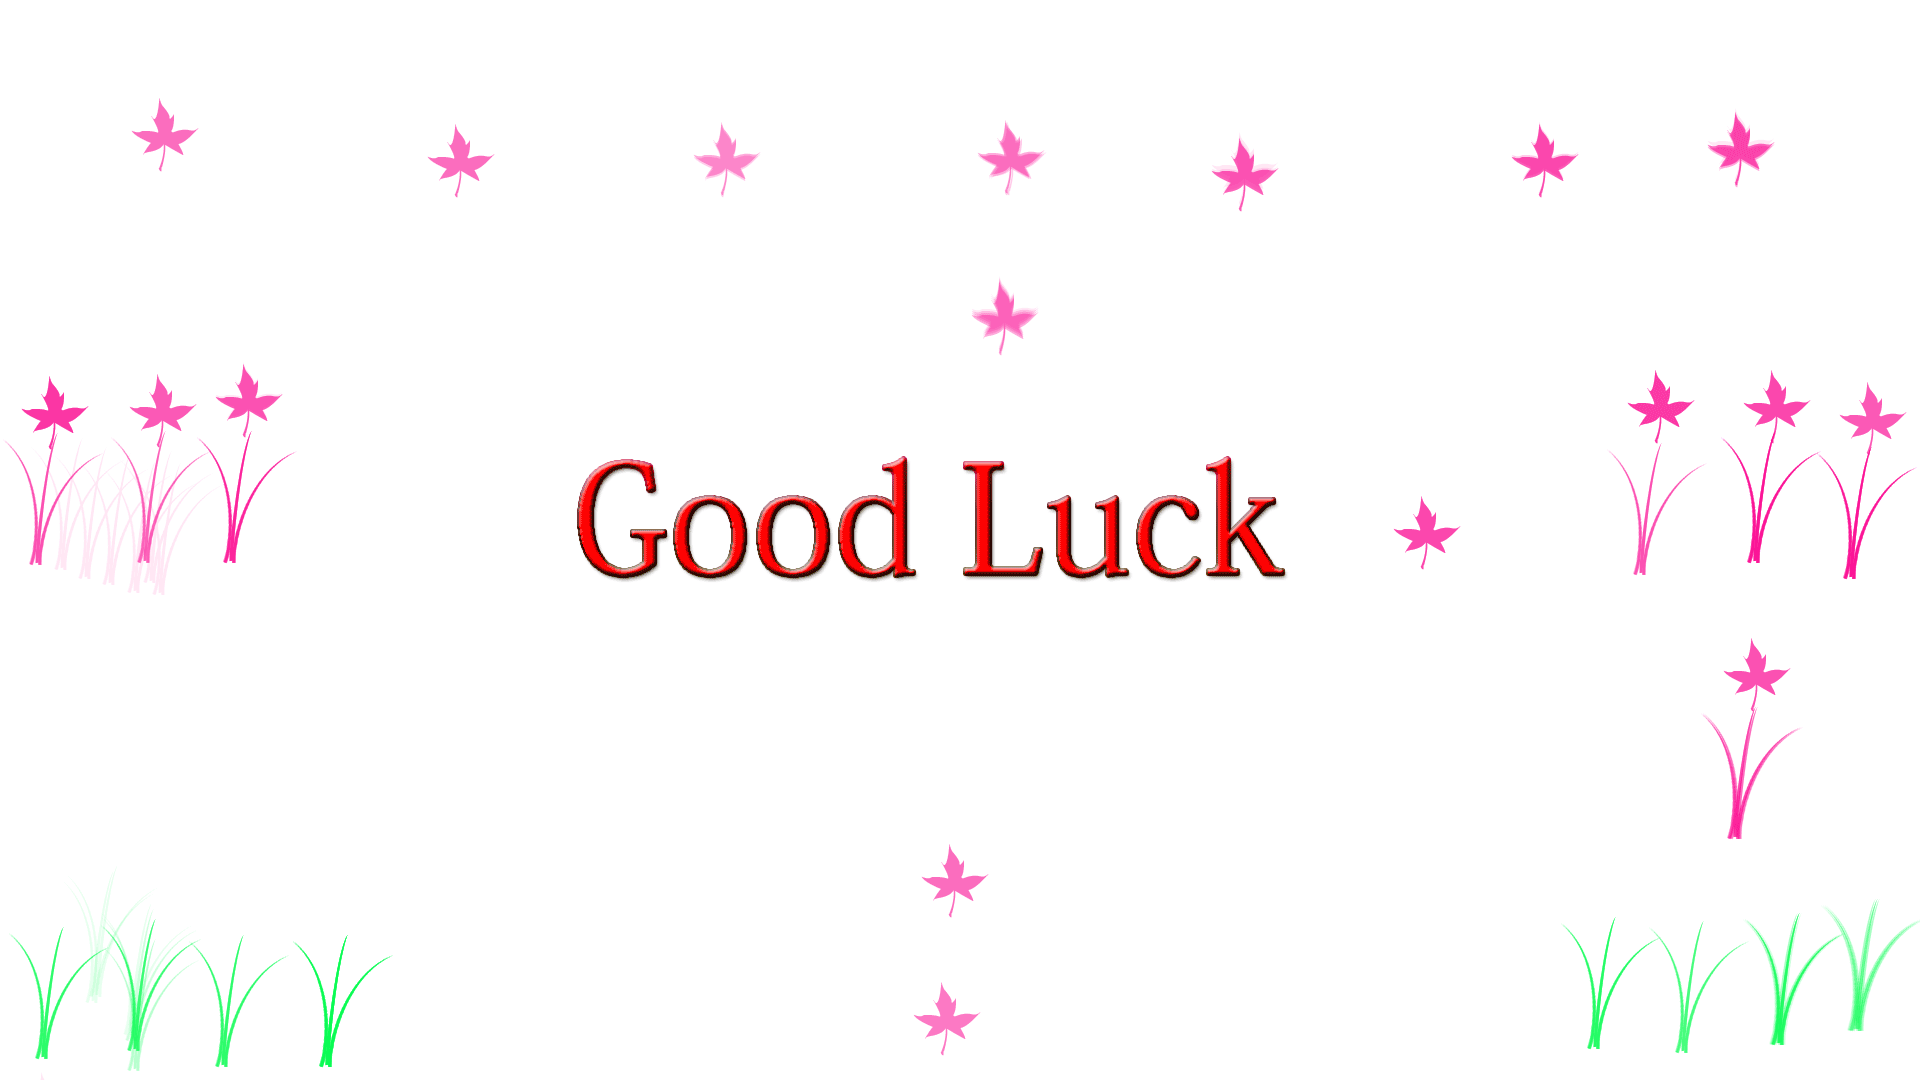 Good luck wishes gifs free download